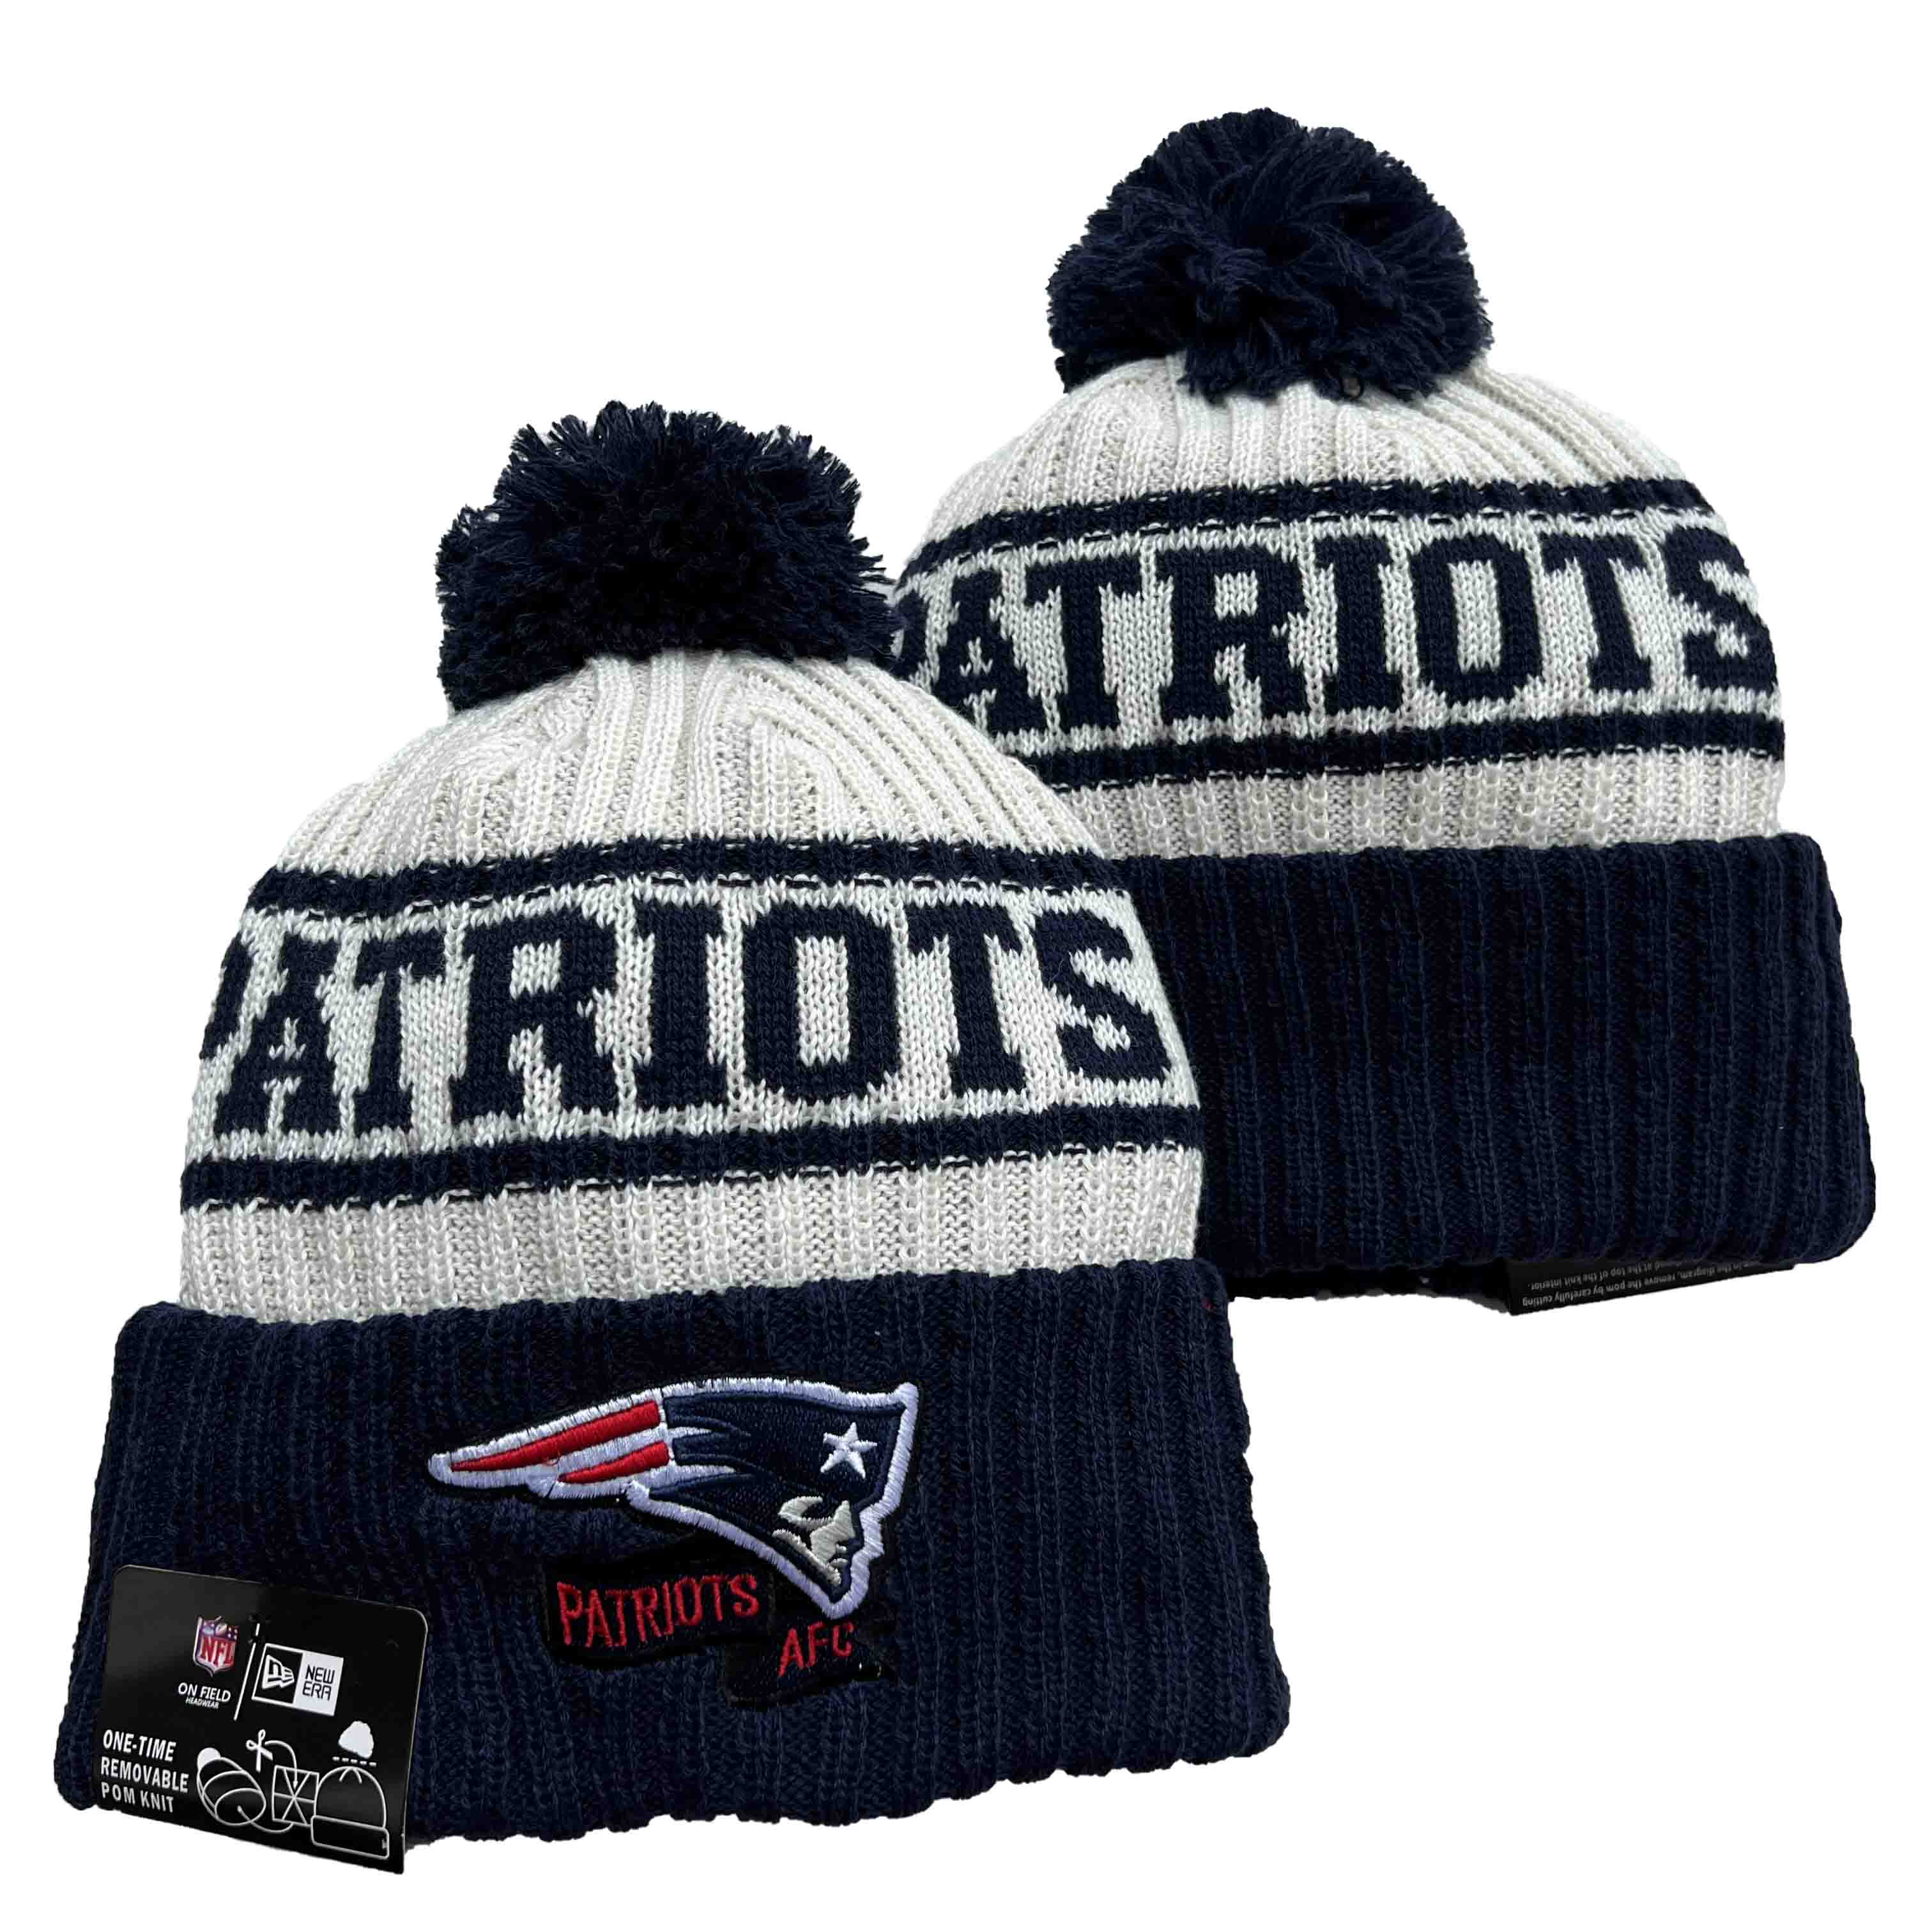 NFL New England Patriots Beanies Knit Hats-YD1251